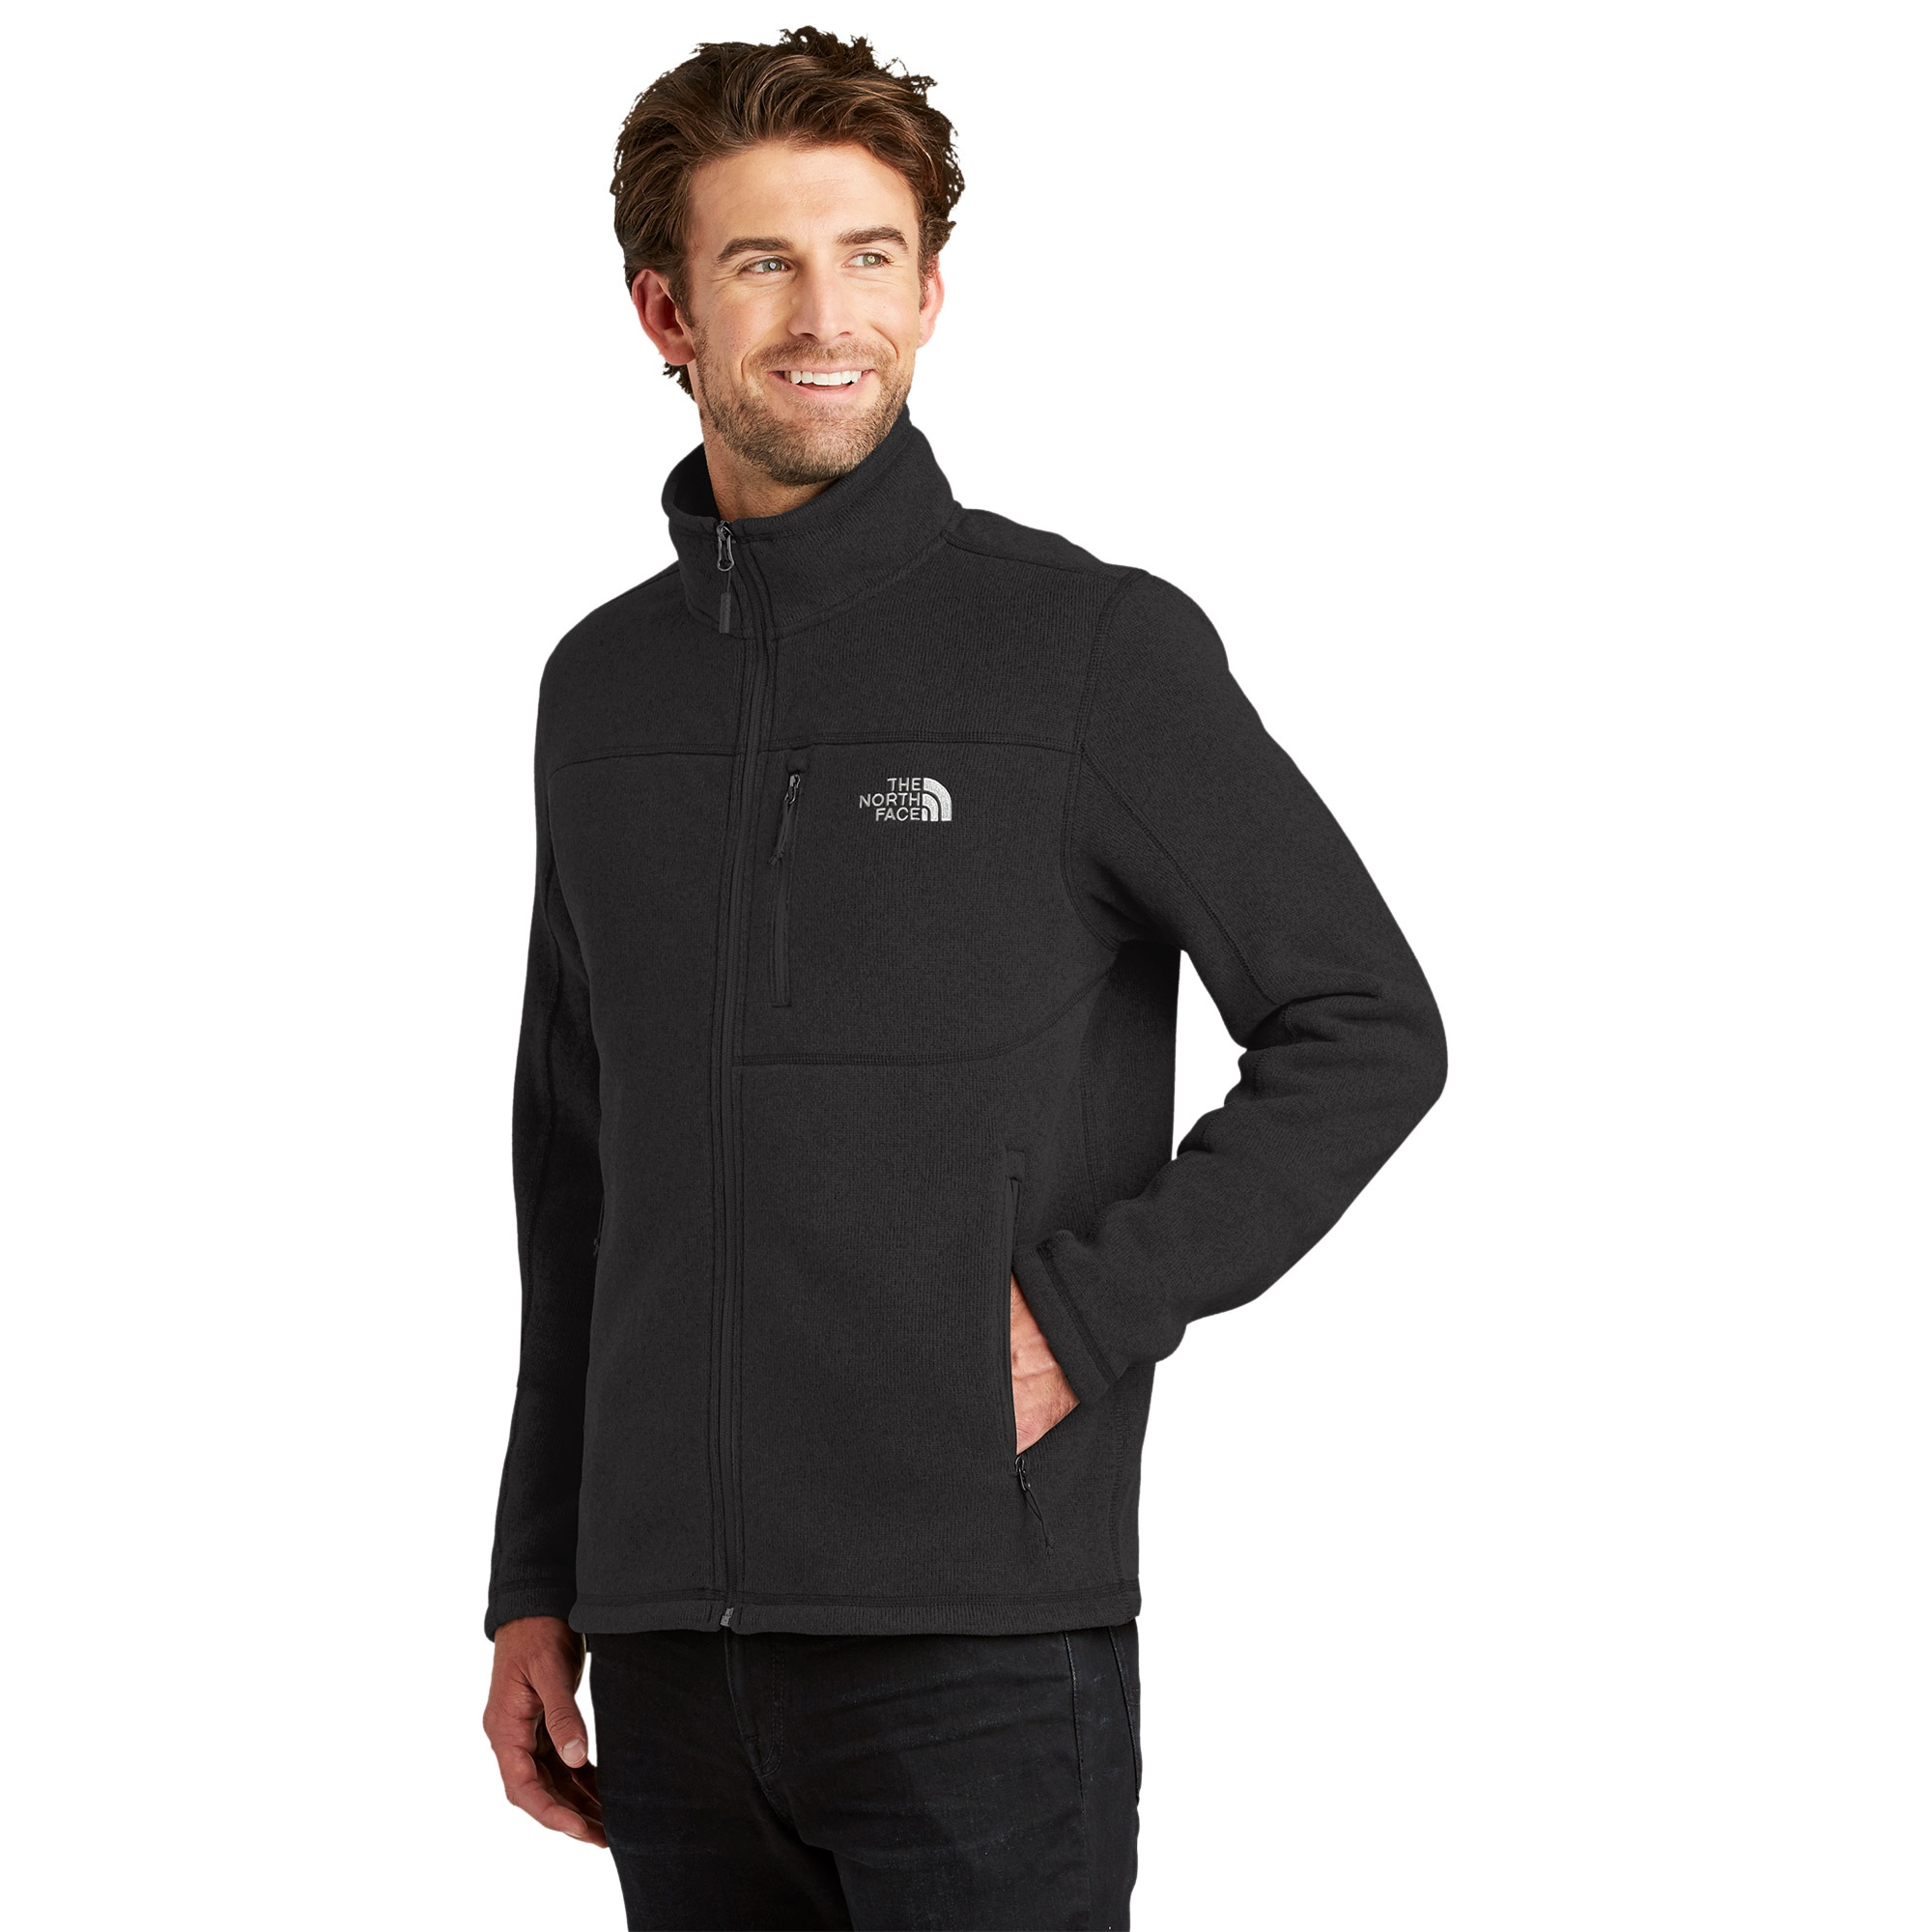 The North Face NF0A3LH7 Sweater Fleece Jacket - Black Heather